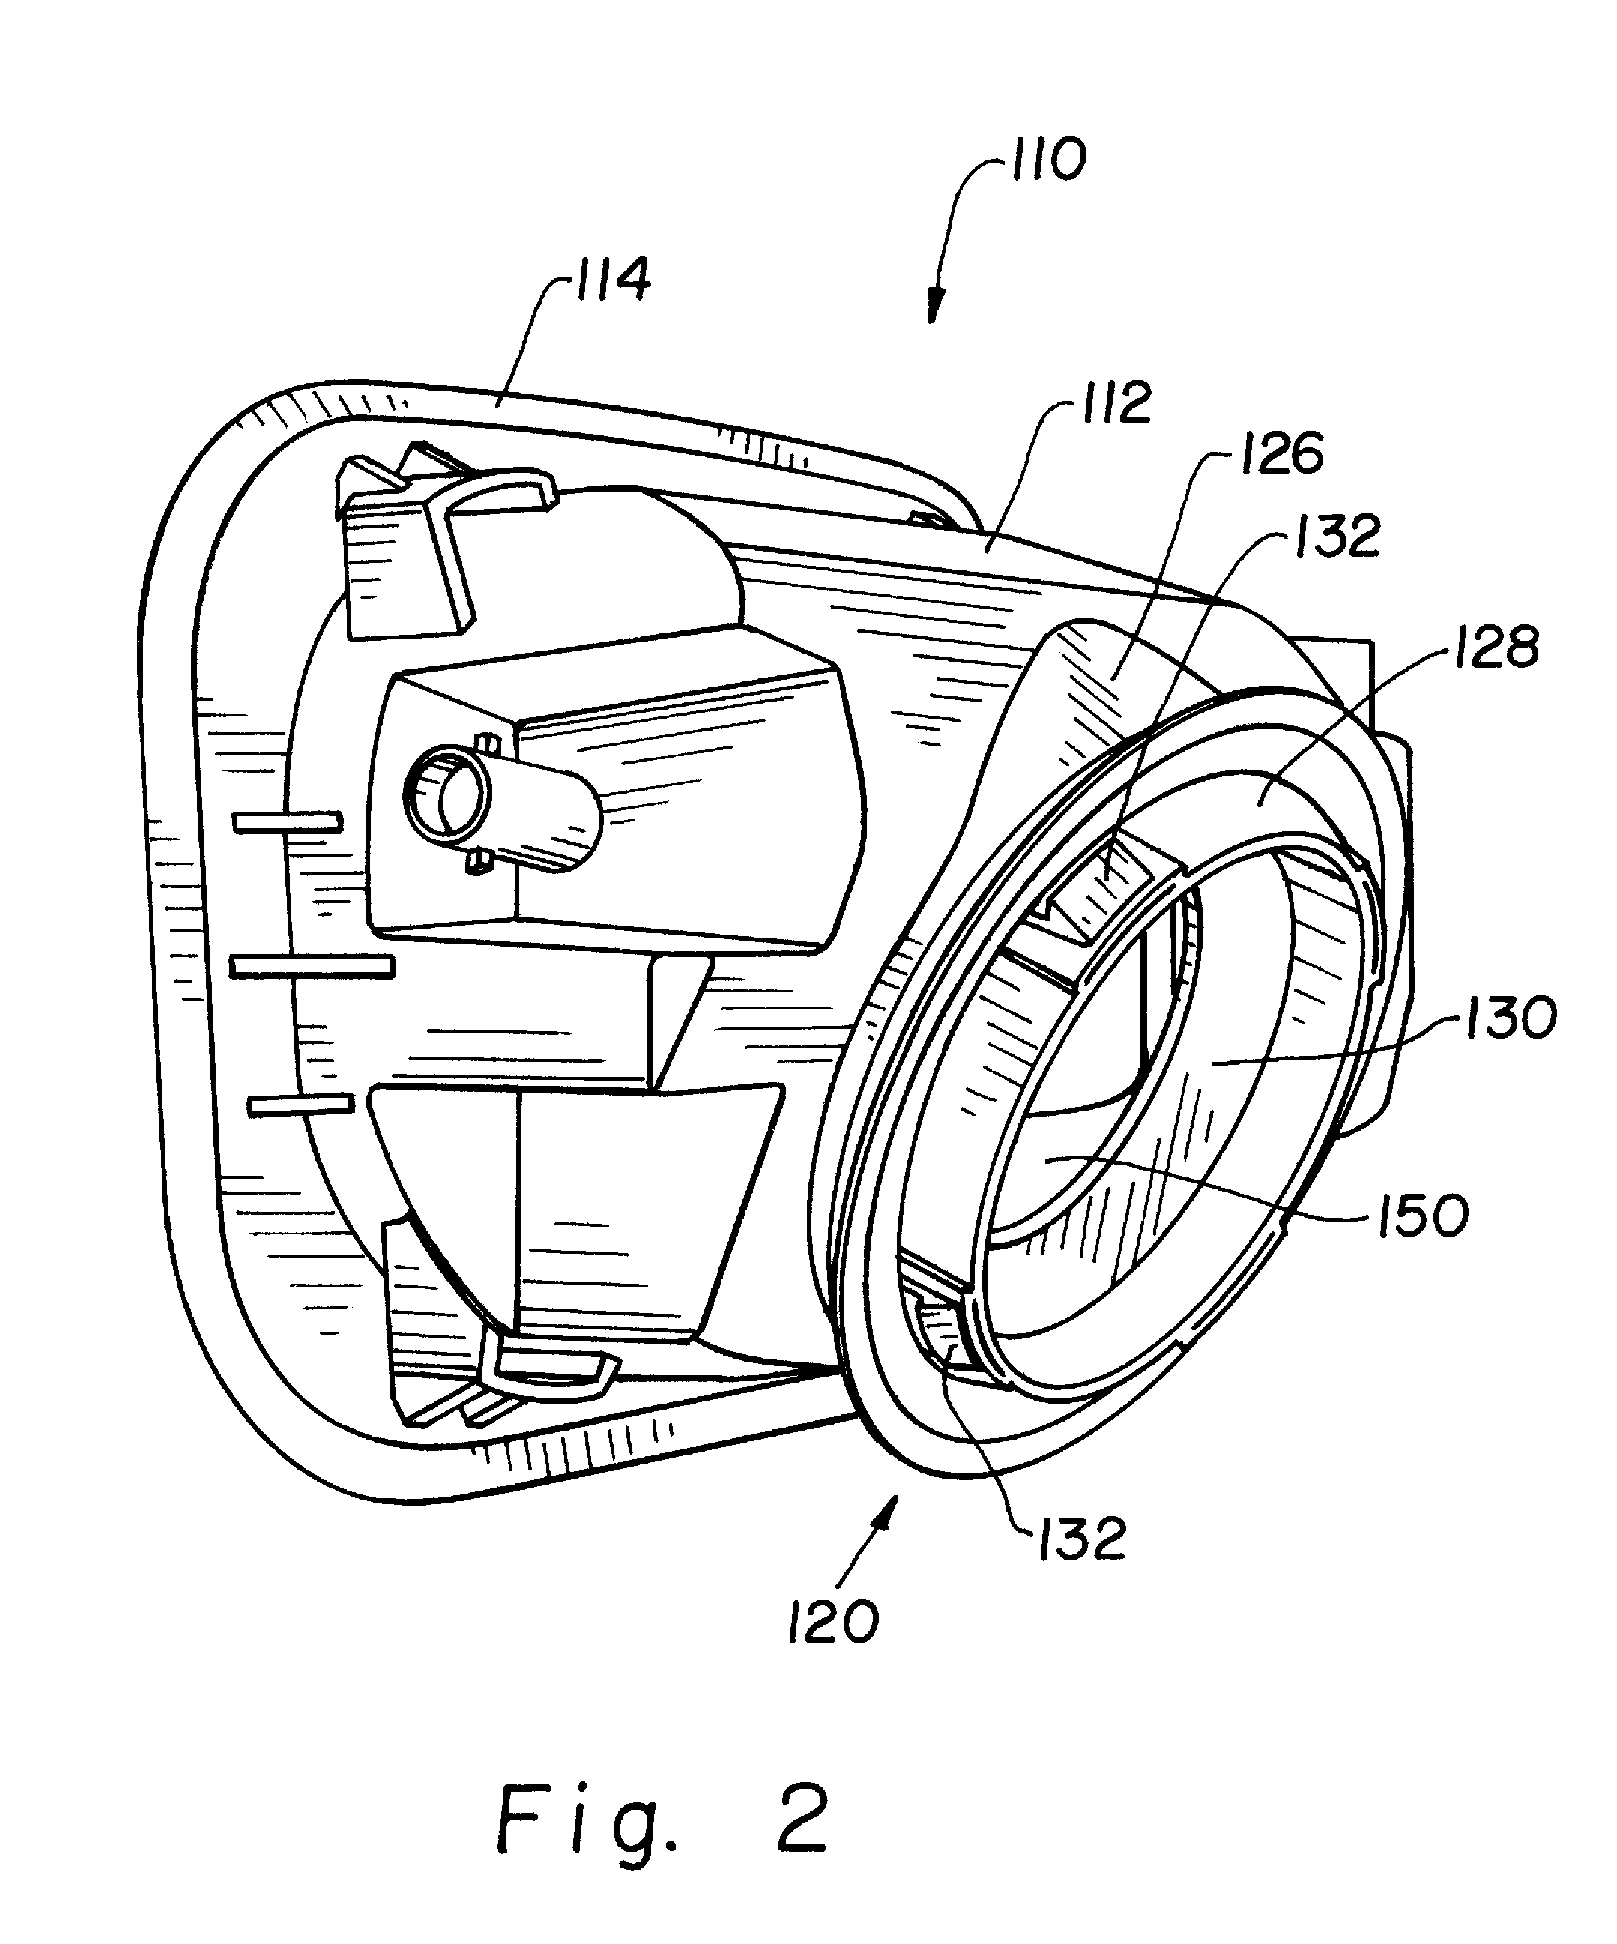 Integrated floating overmolded snap-ring and seal for a plastic fuel housing assembly